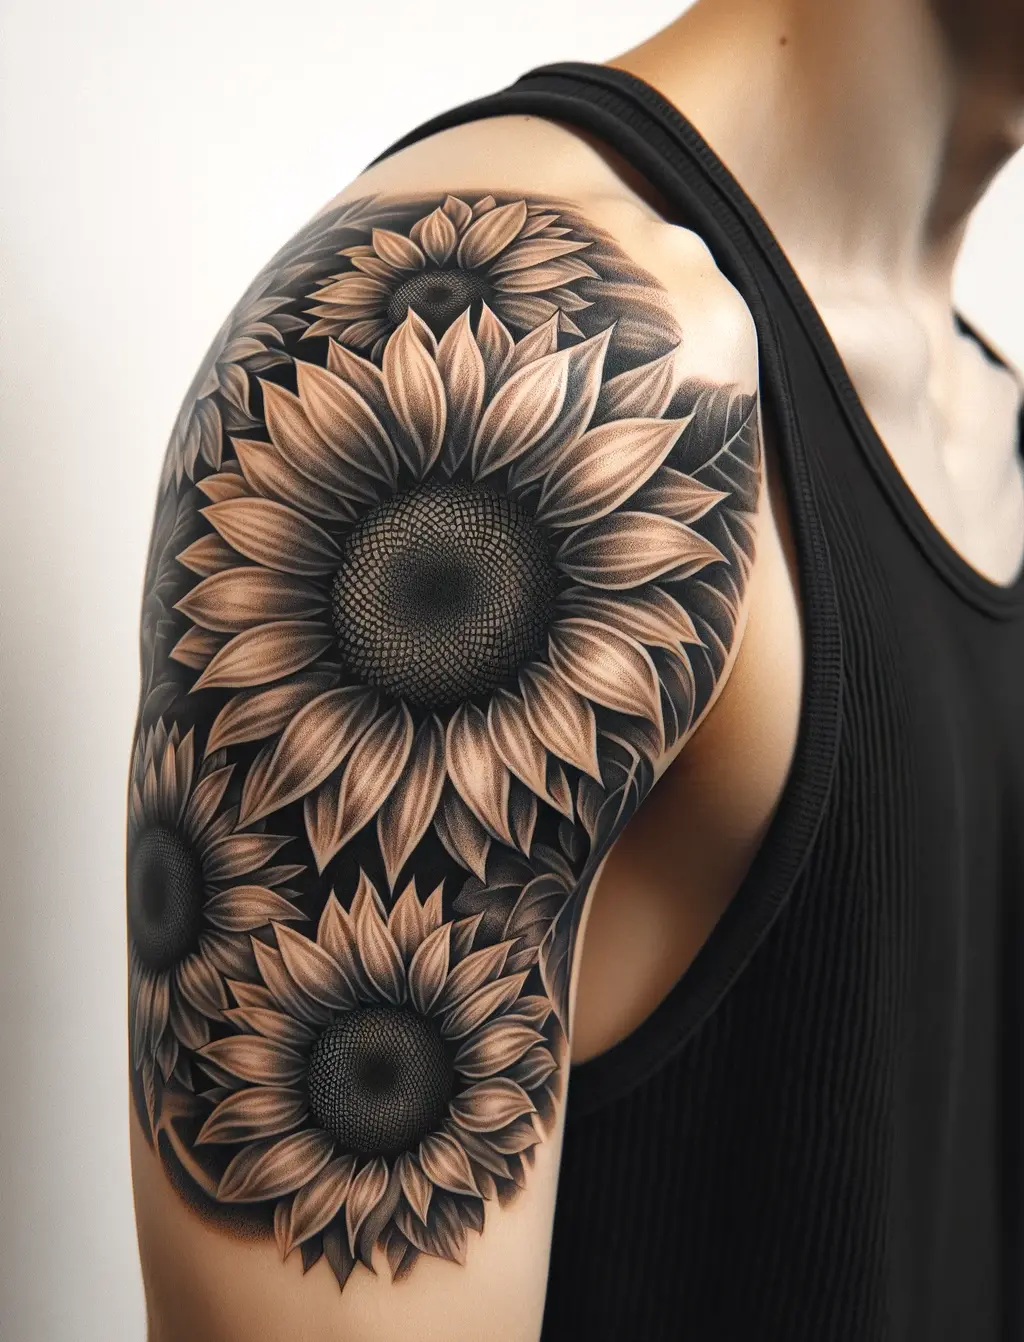 The tattoo features several sunflowers on the upper arm, extending from shoulder to elbow in a cohesive and visually appealing design.